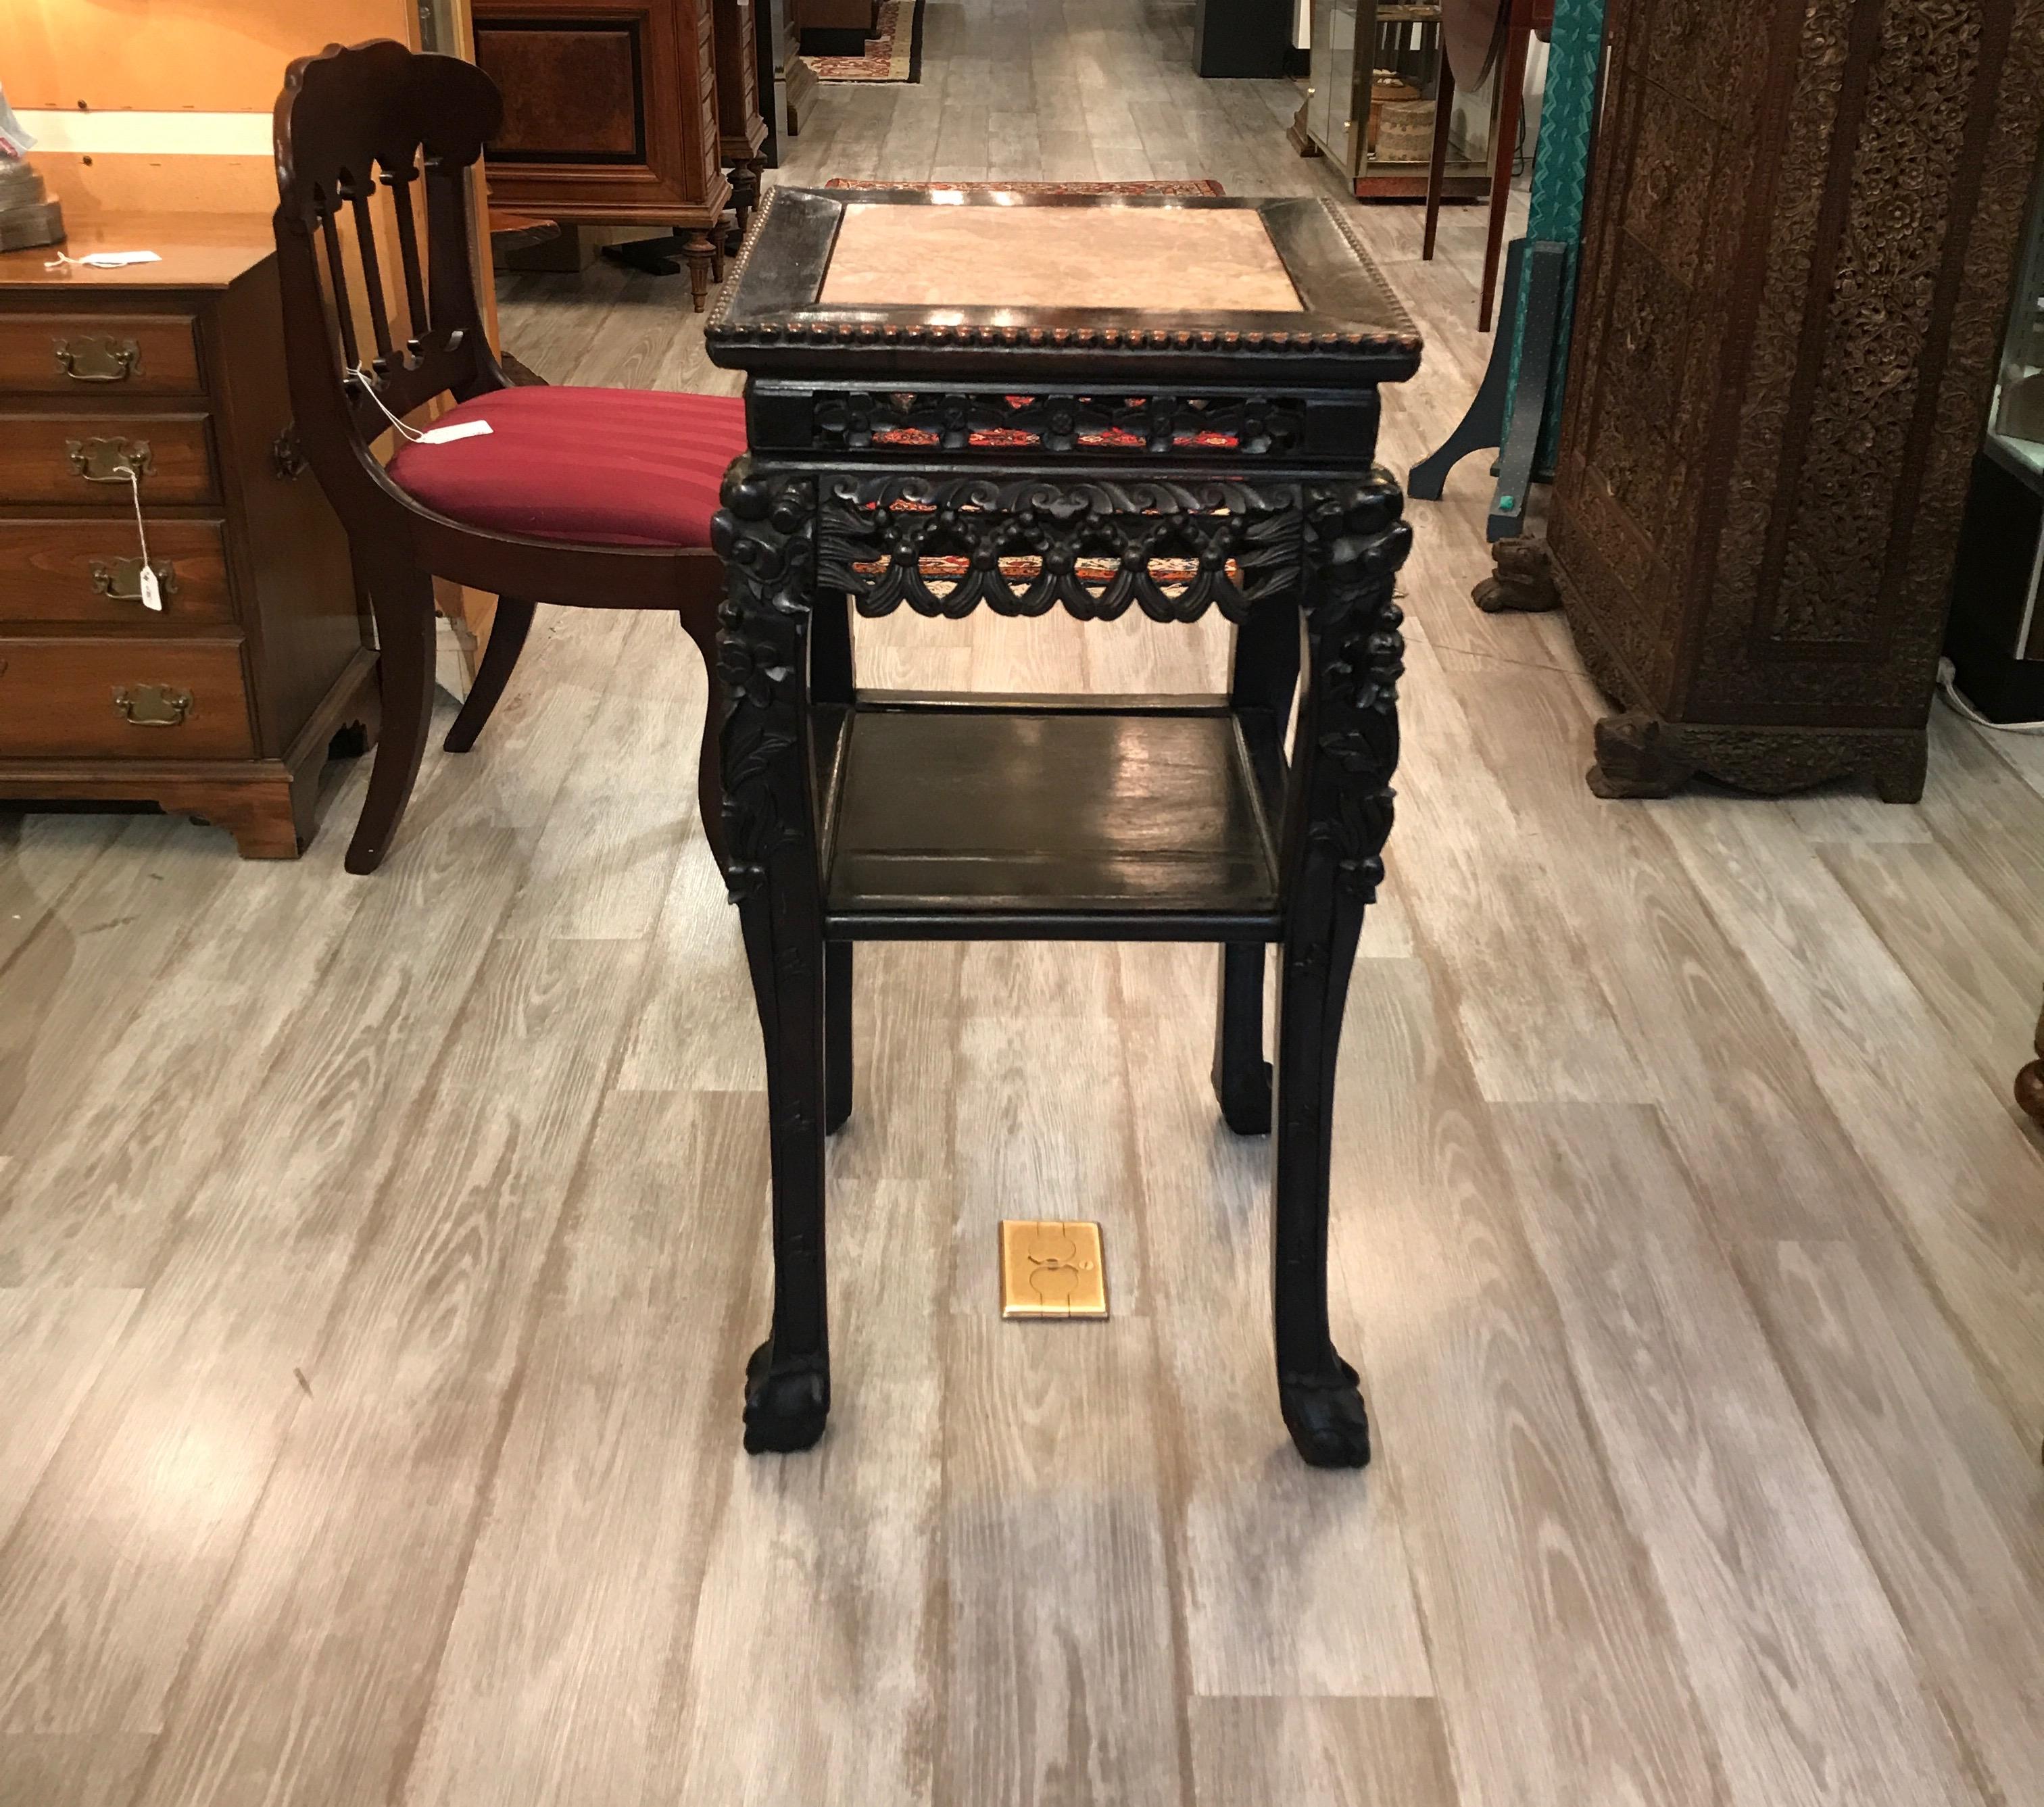 Beautifully carved hardwood square stand with marble top. Carved rosewood with a figurative rouge marble top with lower shelf. Perfect accent piece or for use as a stand for sculpture or porcelain objects.